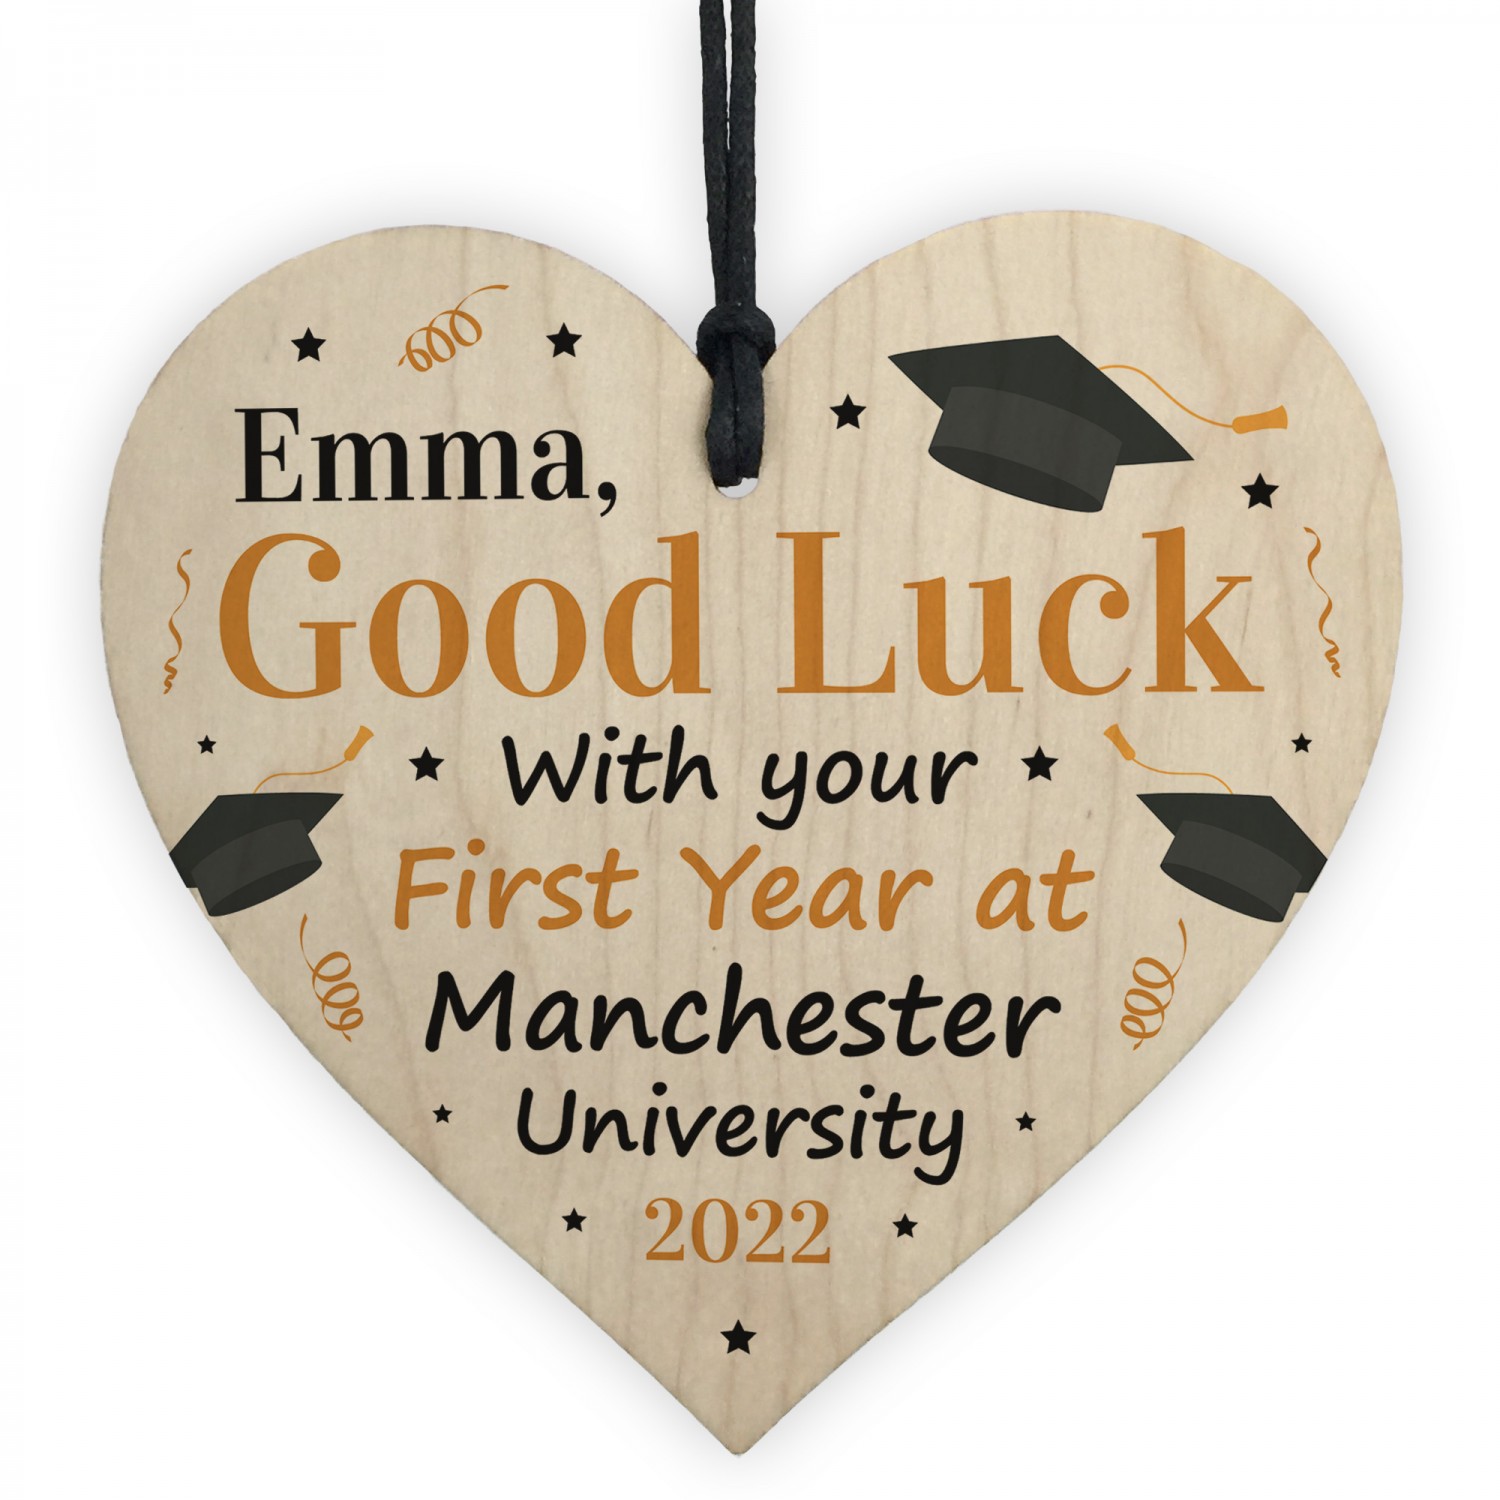 Amazon.com : Good Luck Cards - Four Leaf Clover - You Got This Cards, Good  Luck Gifts Exam School Card GCSE Uni, 5.7 x 5.7 Inch Good Luck Charm  Greeting Cards for